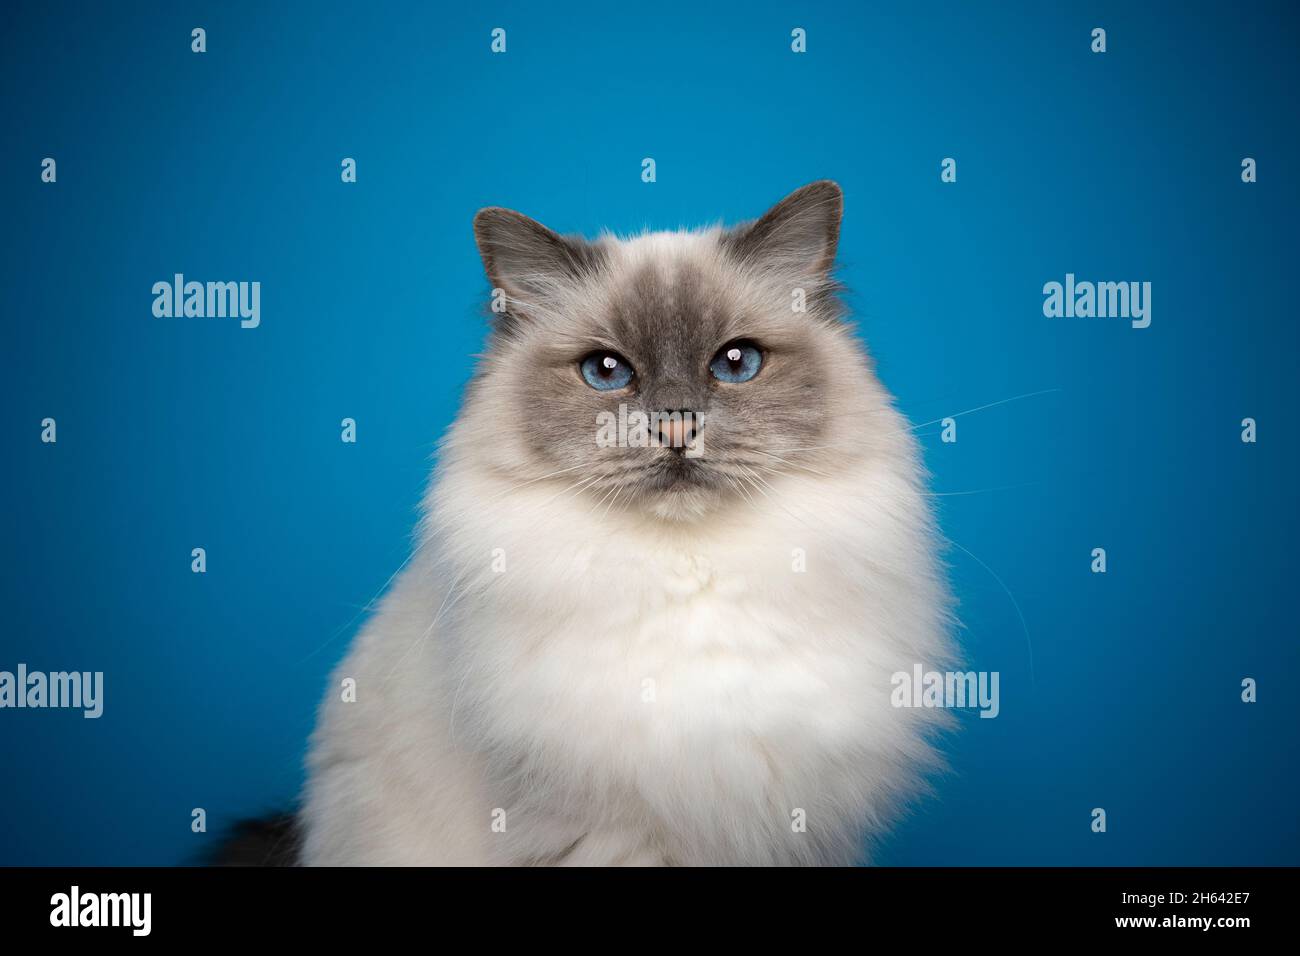 fluffy blue point birman cat with blue eyes portrait on blue background with copy space Stock Photo